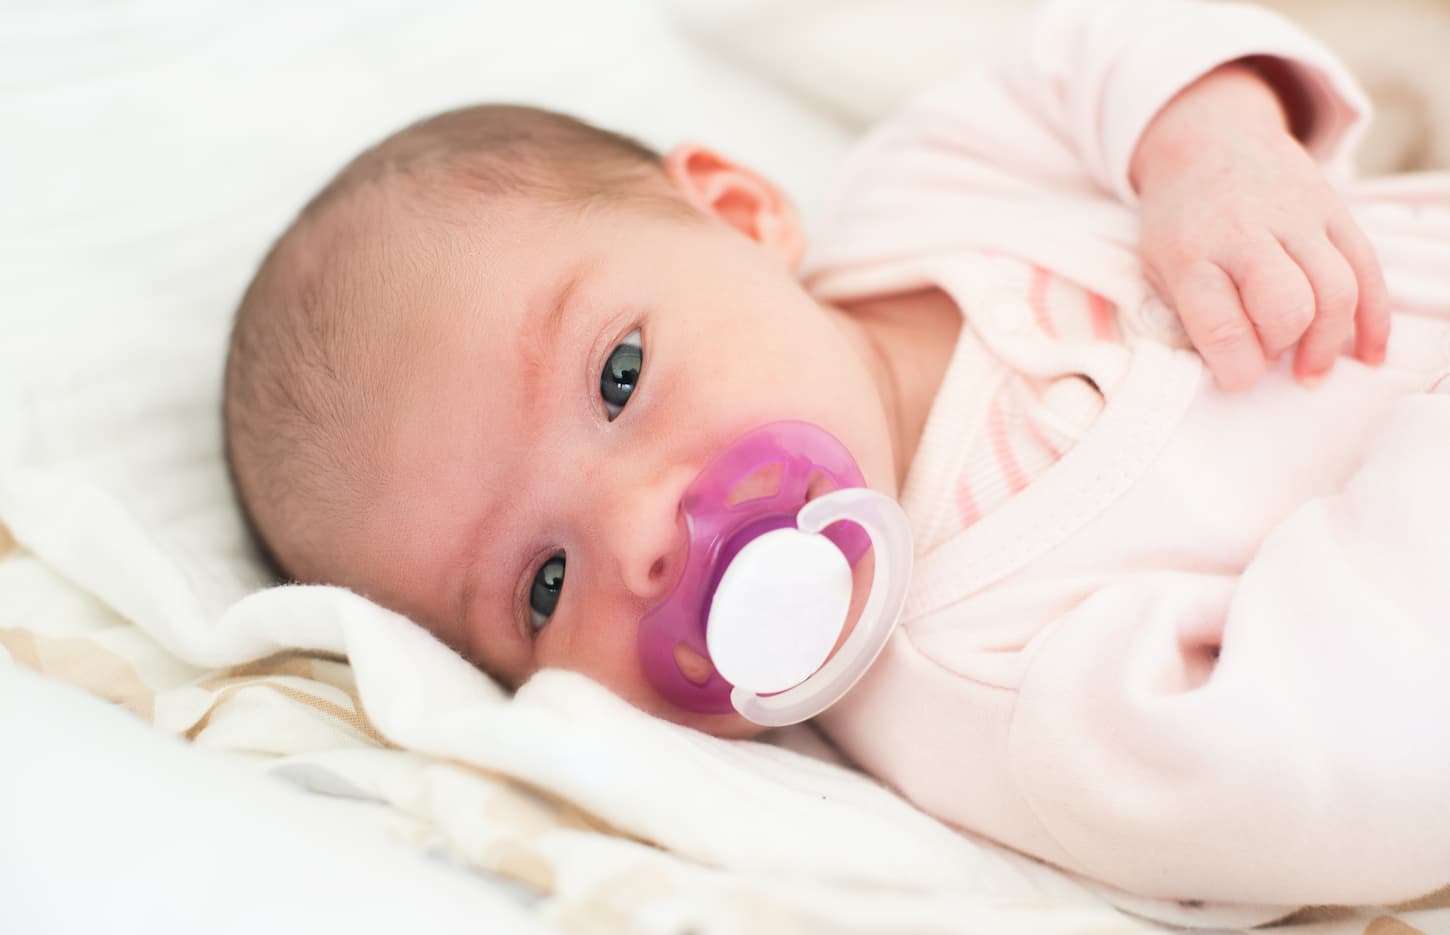 An image of a newborn baby lying on its side with a white soothing pacifier.